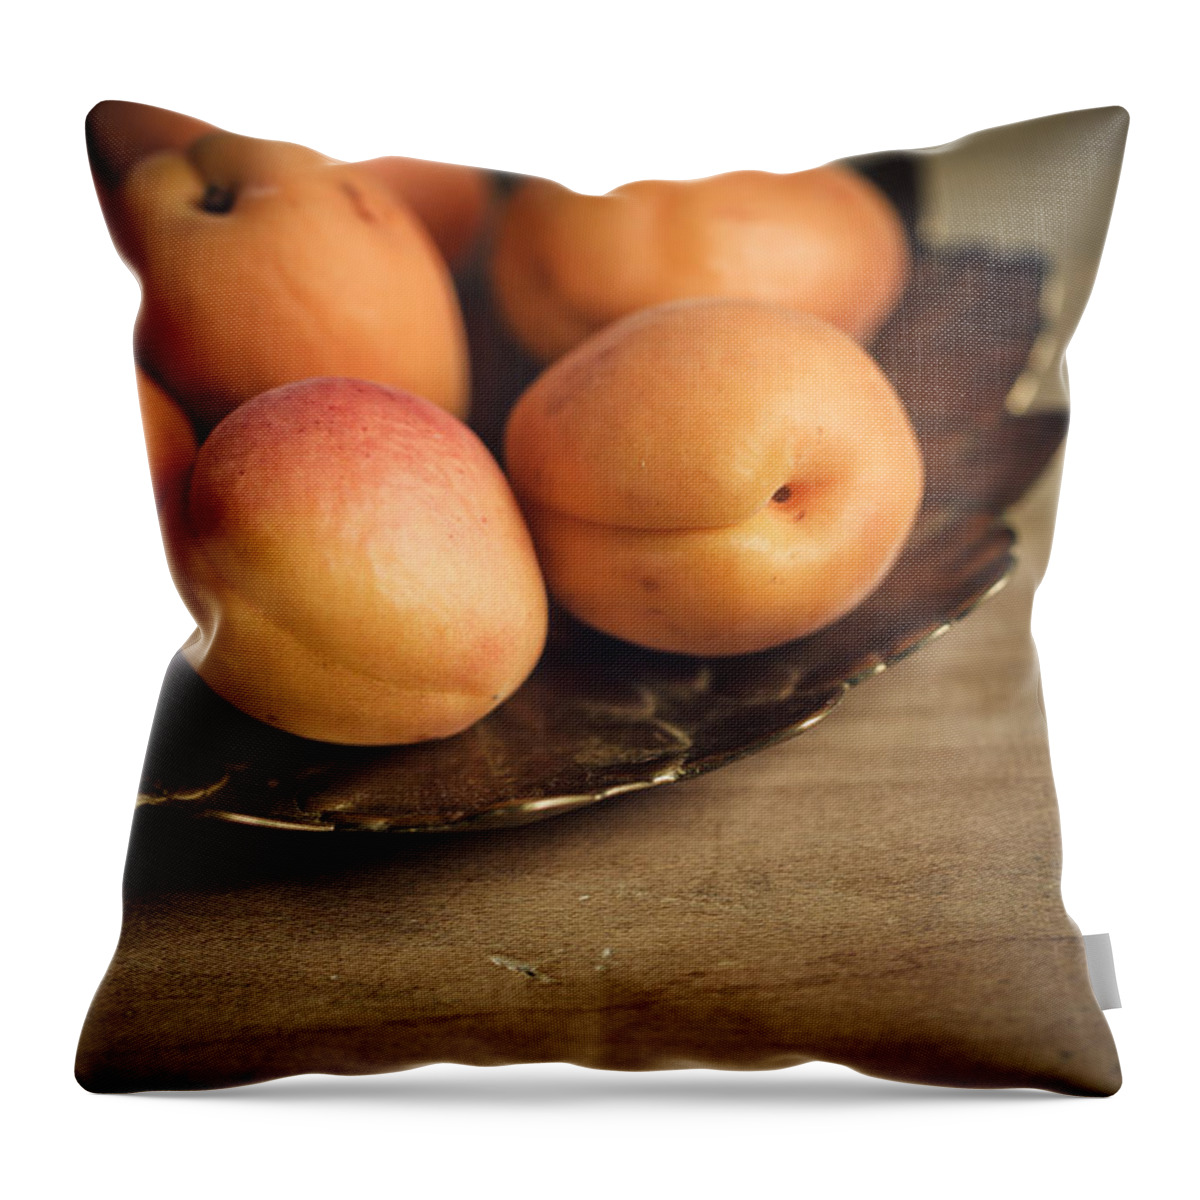 Apricot Throw Pillow featuring the photograph Apricots by Nailia Schwarz